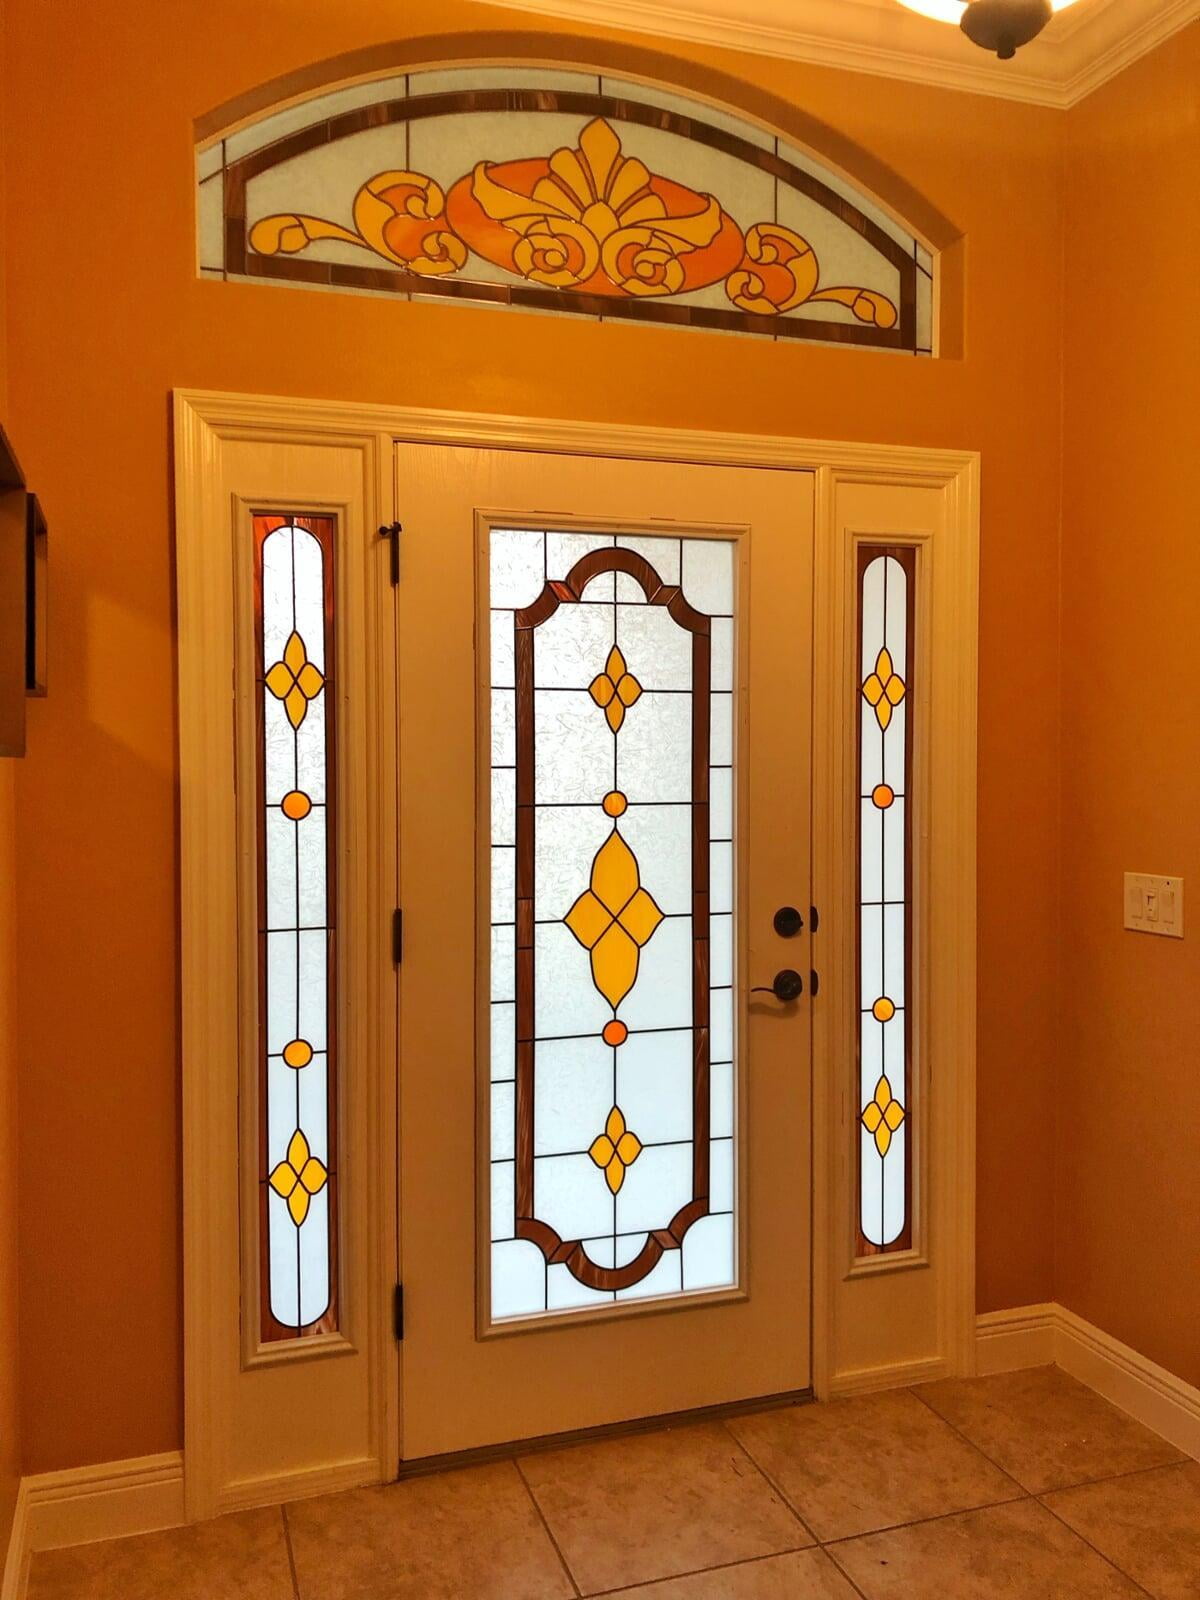 Entry way door, sidelights and transom in traditional stained glass style